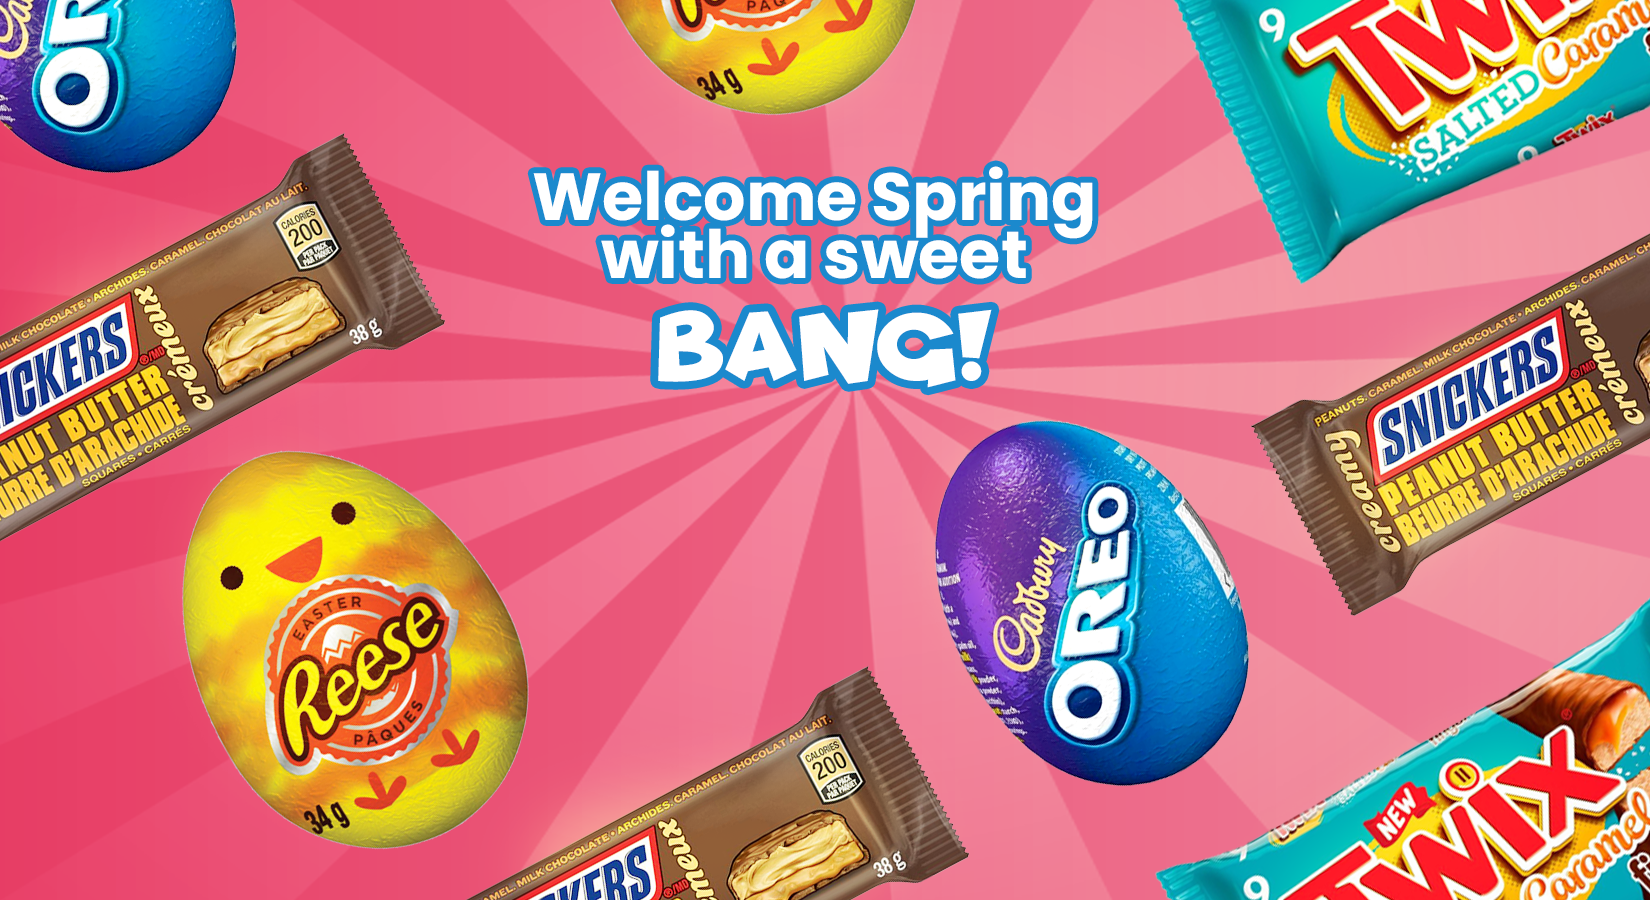 Welcome SPRING with a sweet bang!